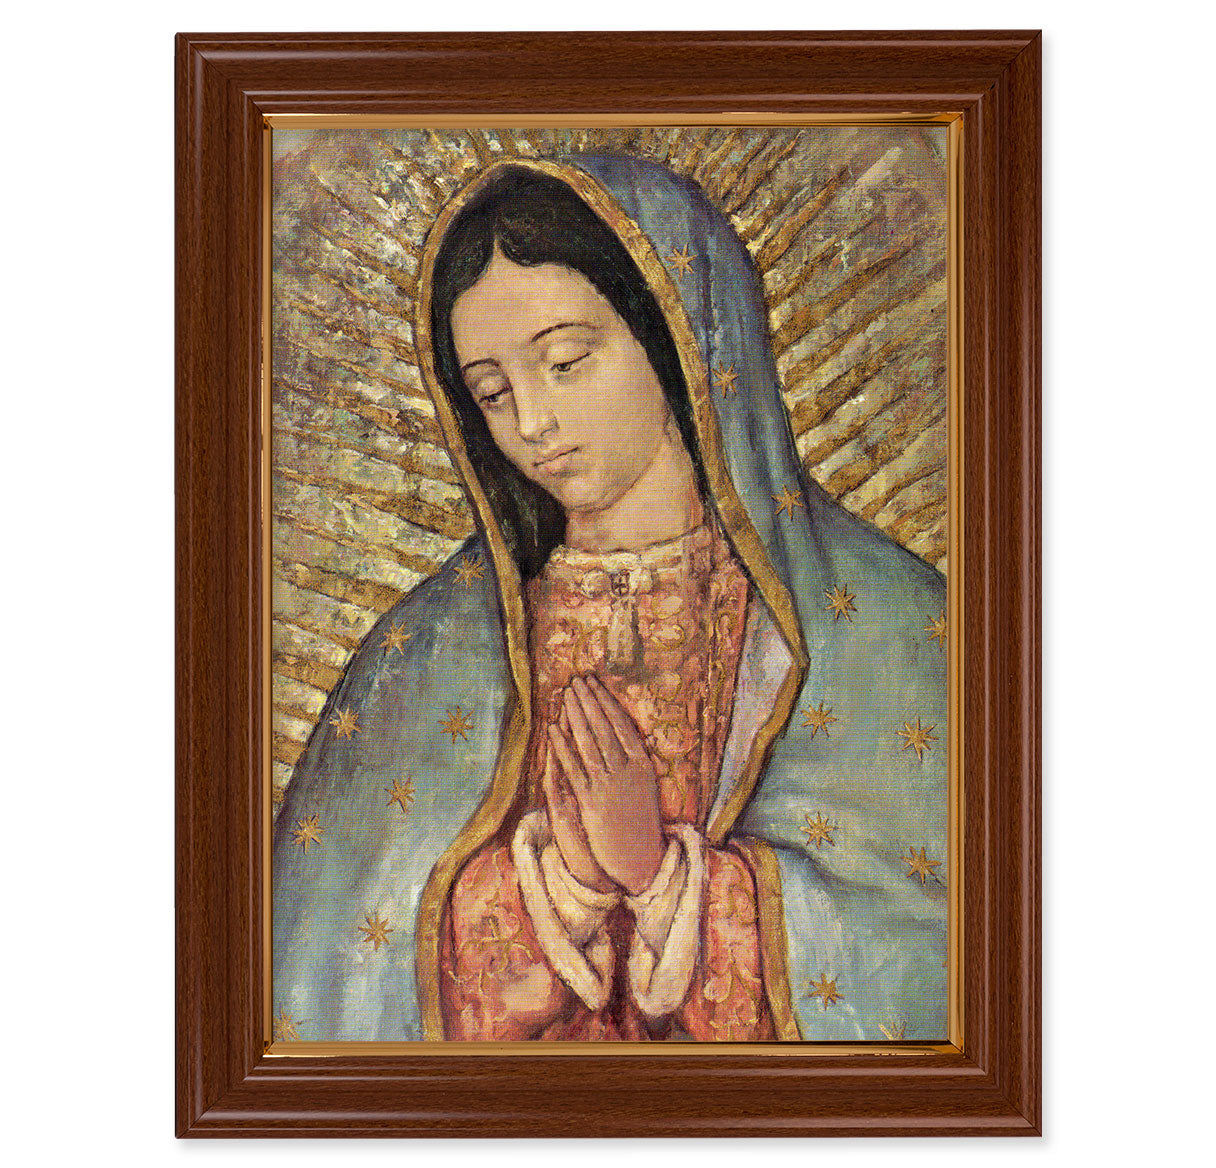 Our Lady of Guadalupe Walnut Finish Framed Art